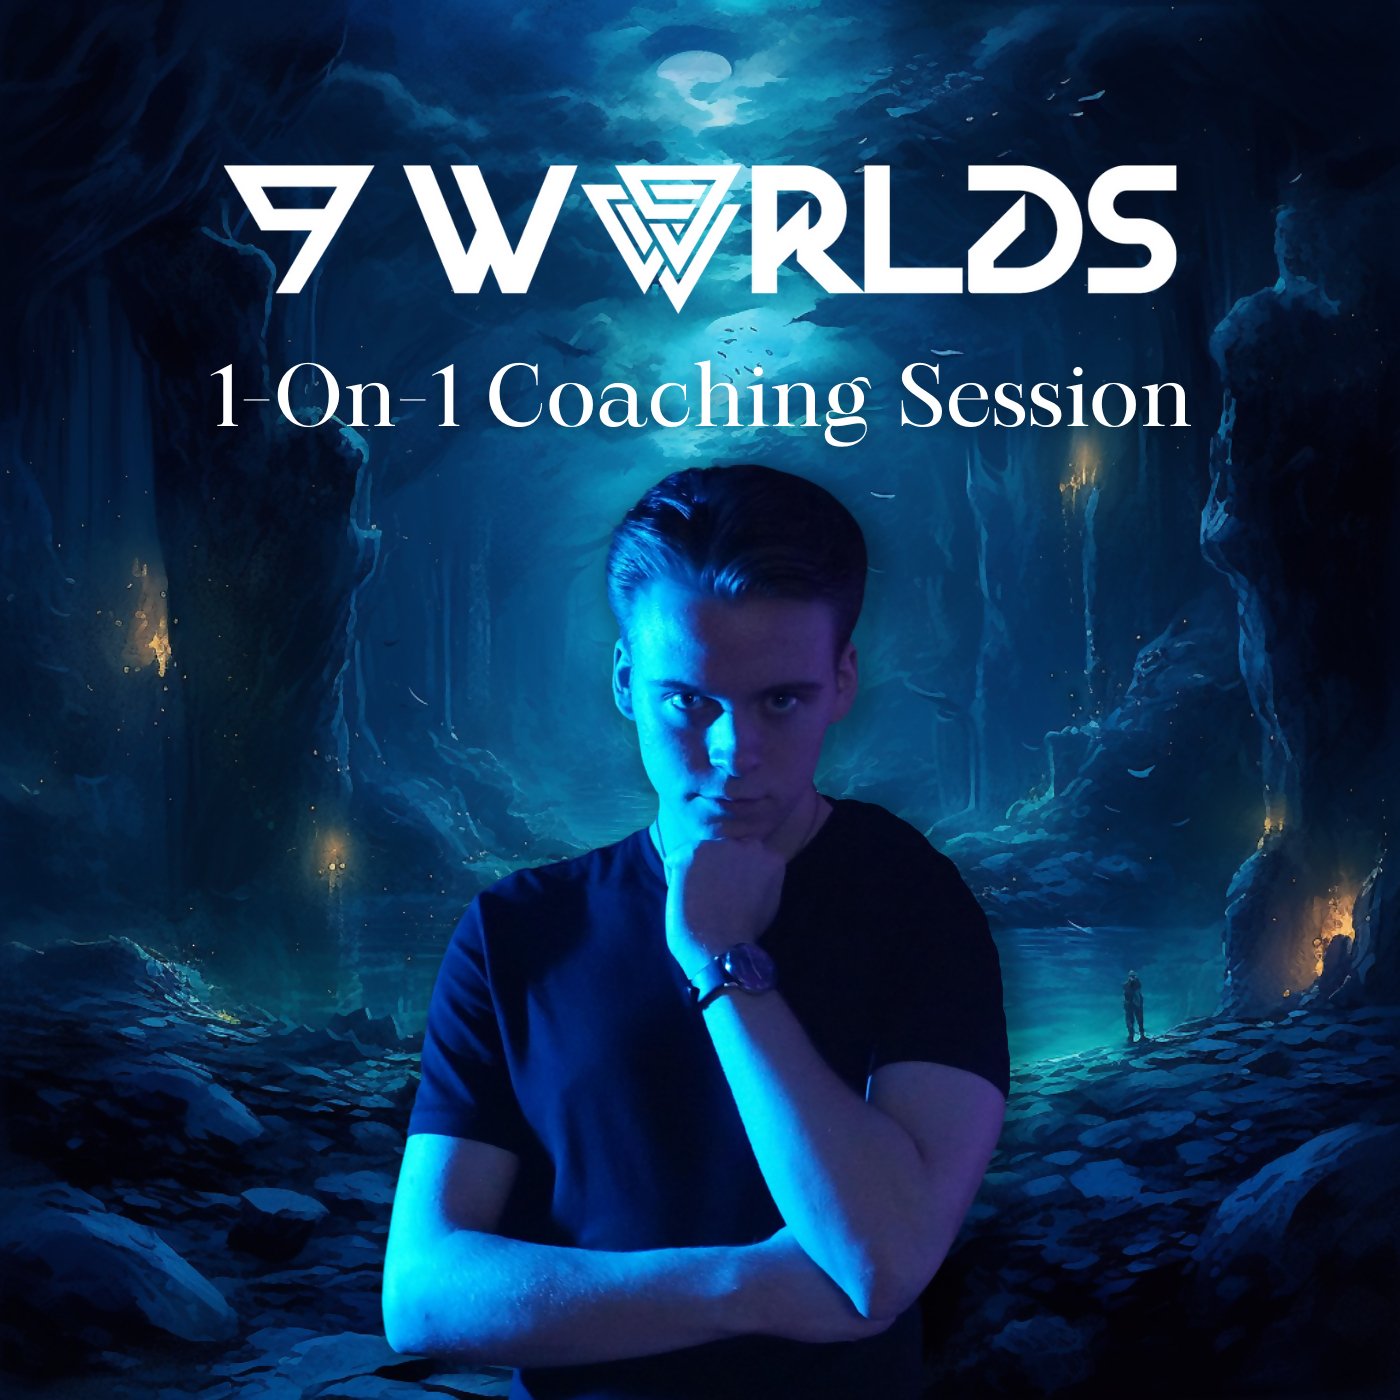 1-On-1 Coaching Session - 9 Worlds - Scraps Audio